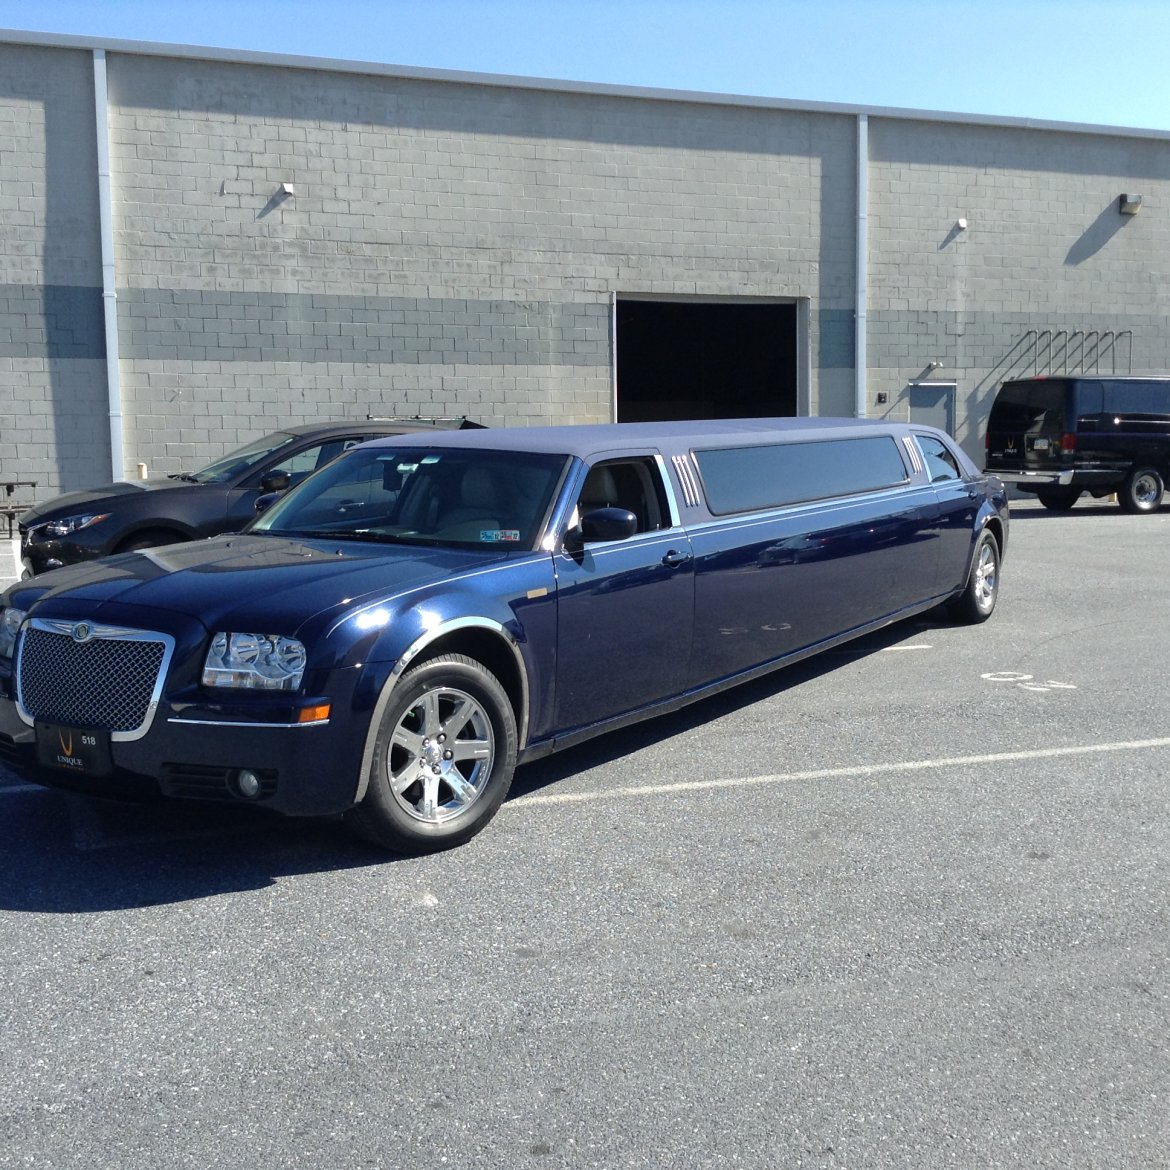 Limousine for sale: 2006 Lincoln Chrysler 300 by Springfield Coach Builders